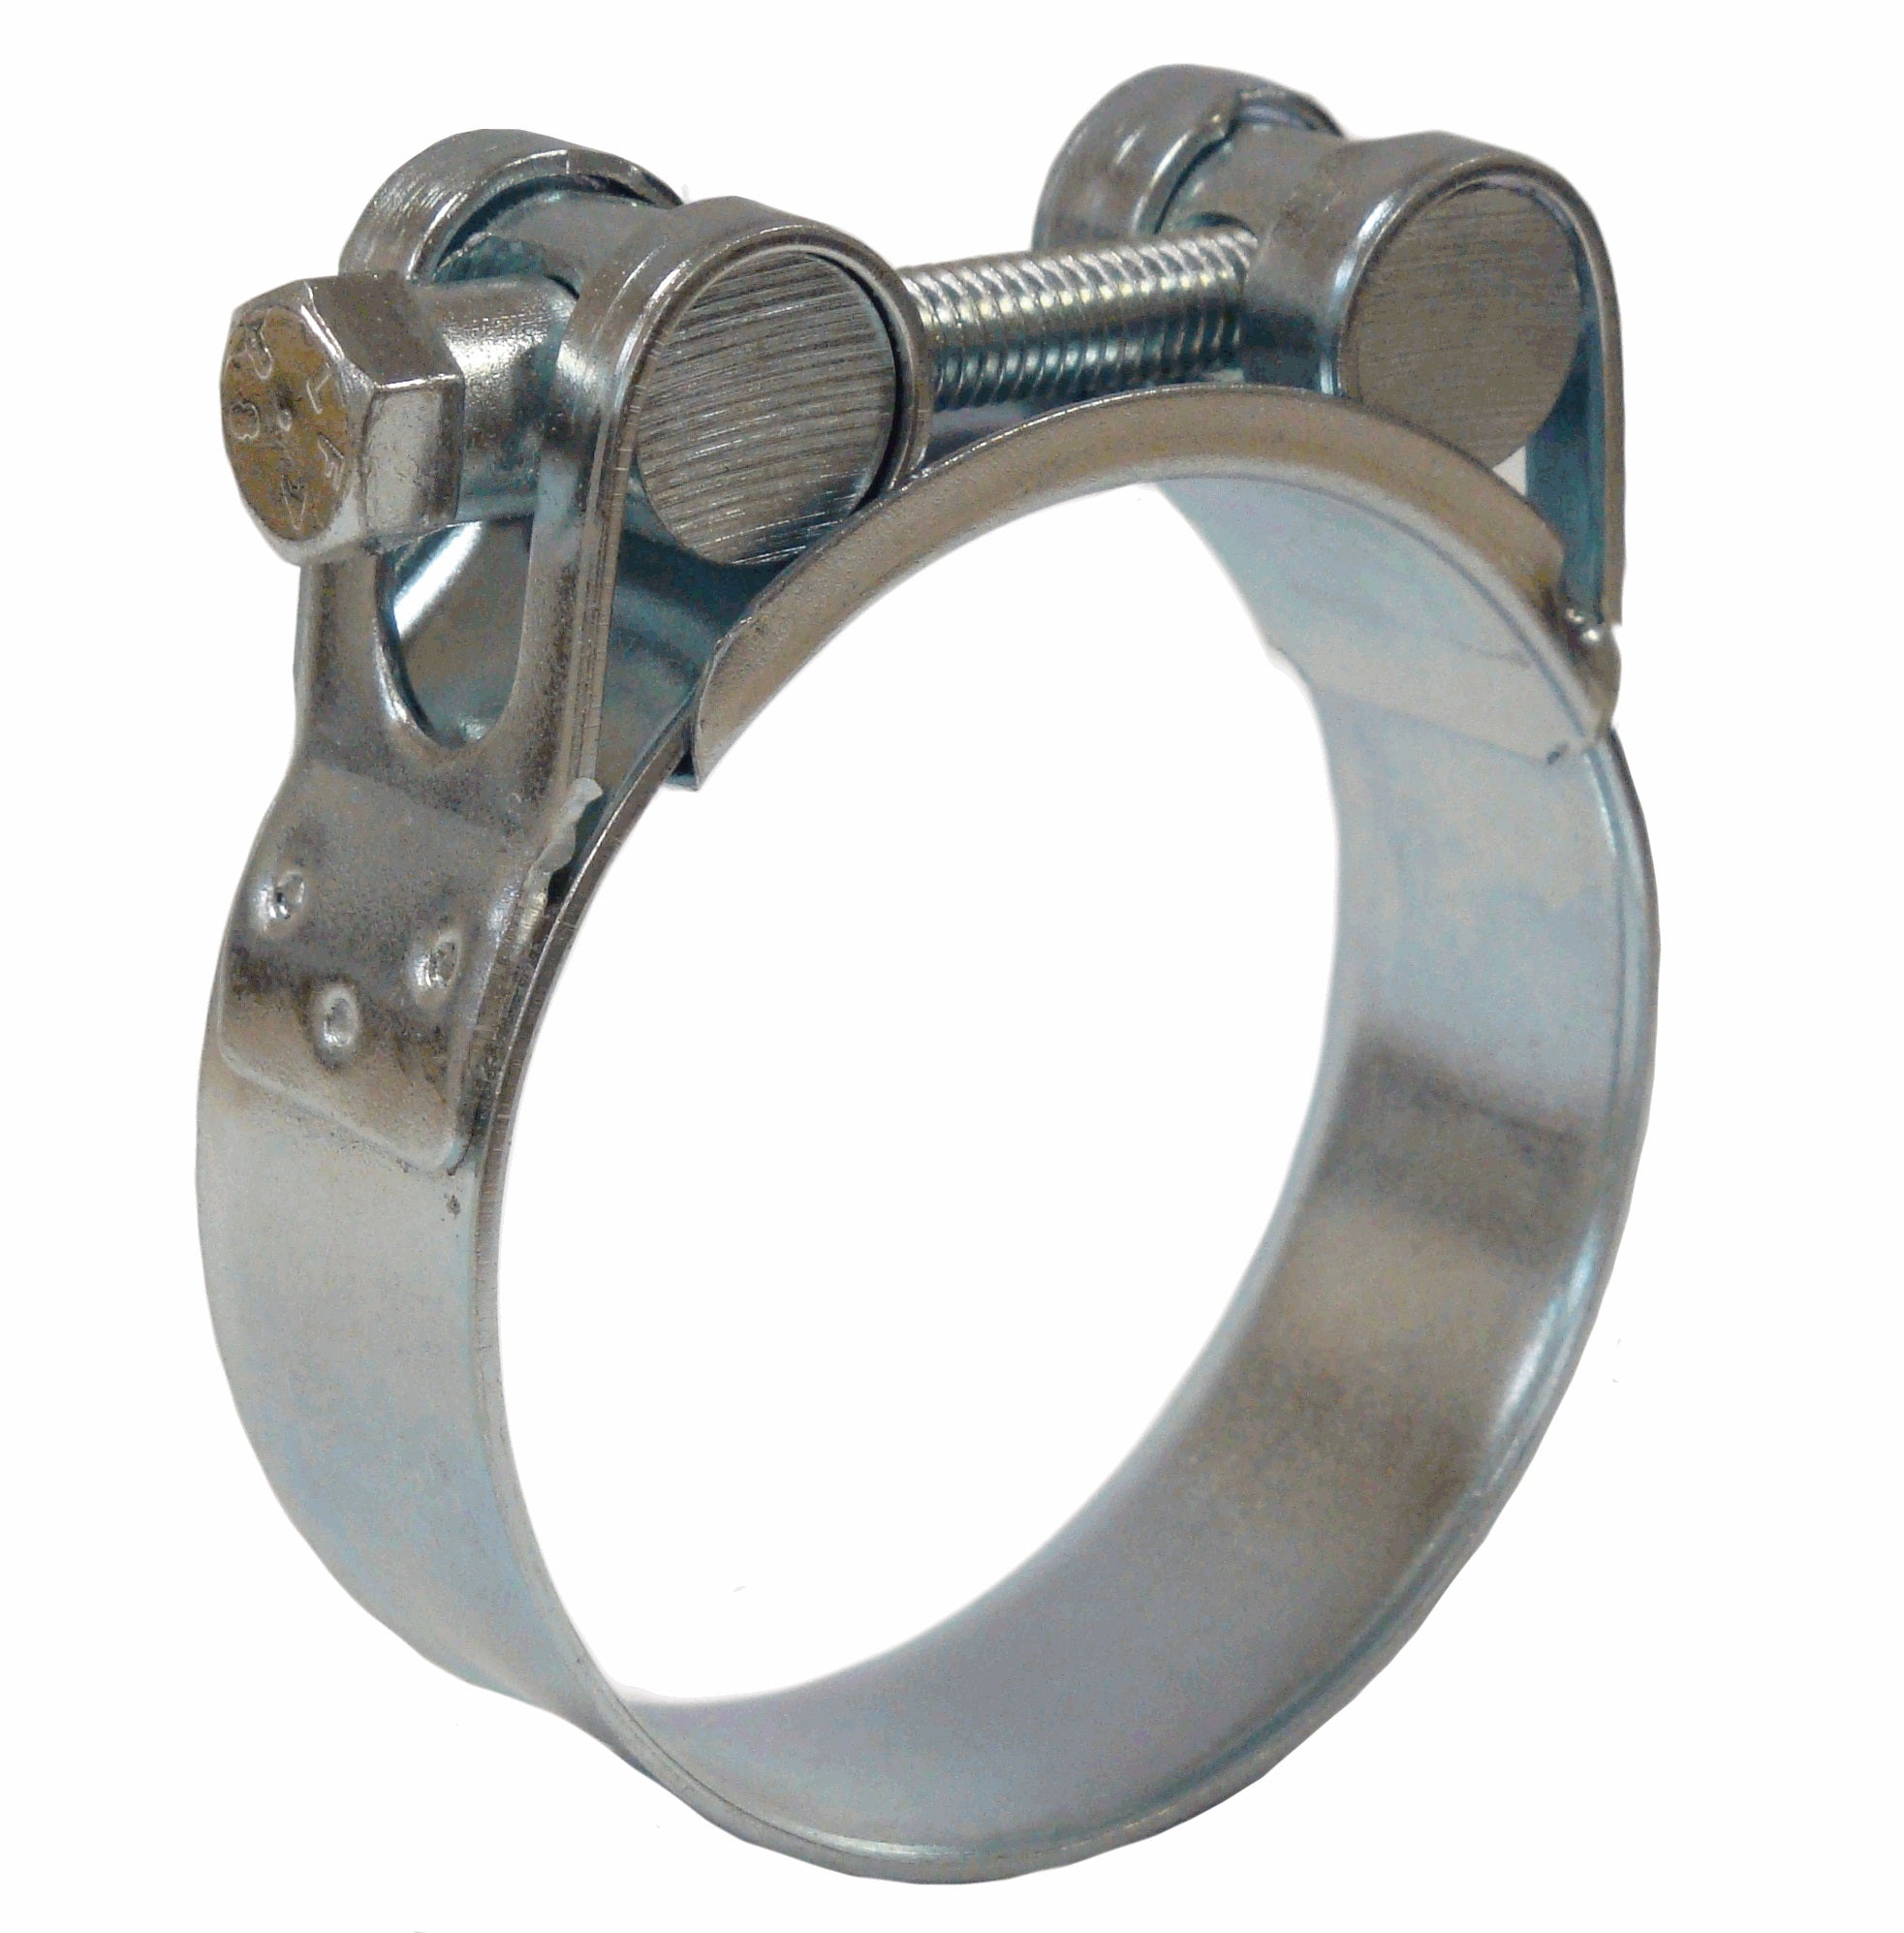 Jubilee® Superclamp 92-97mm 316 Stainless Steel